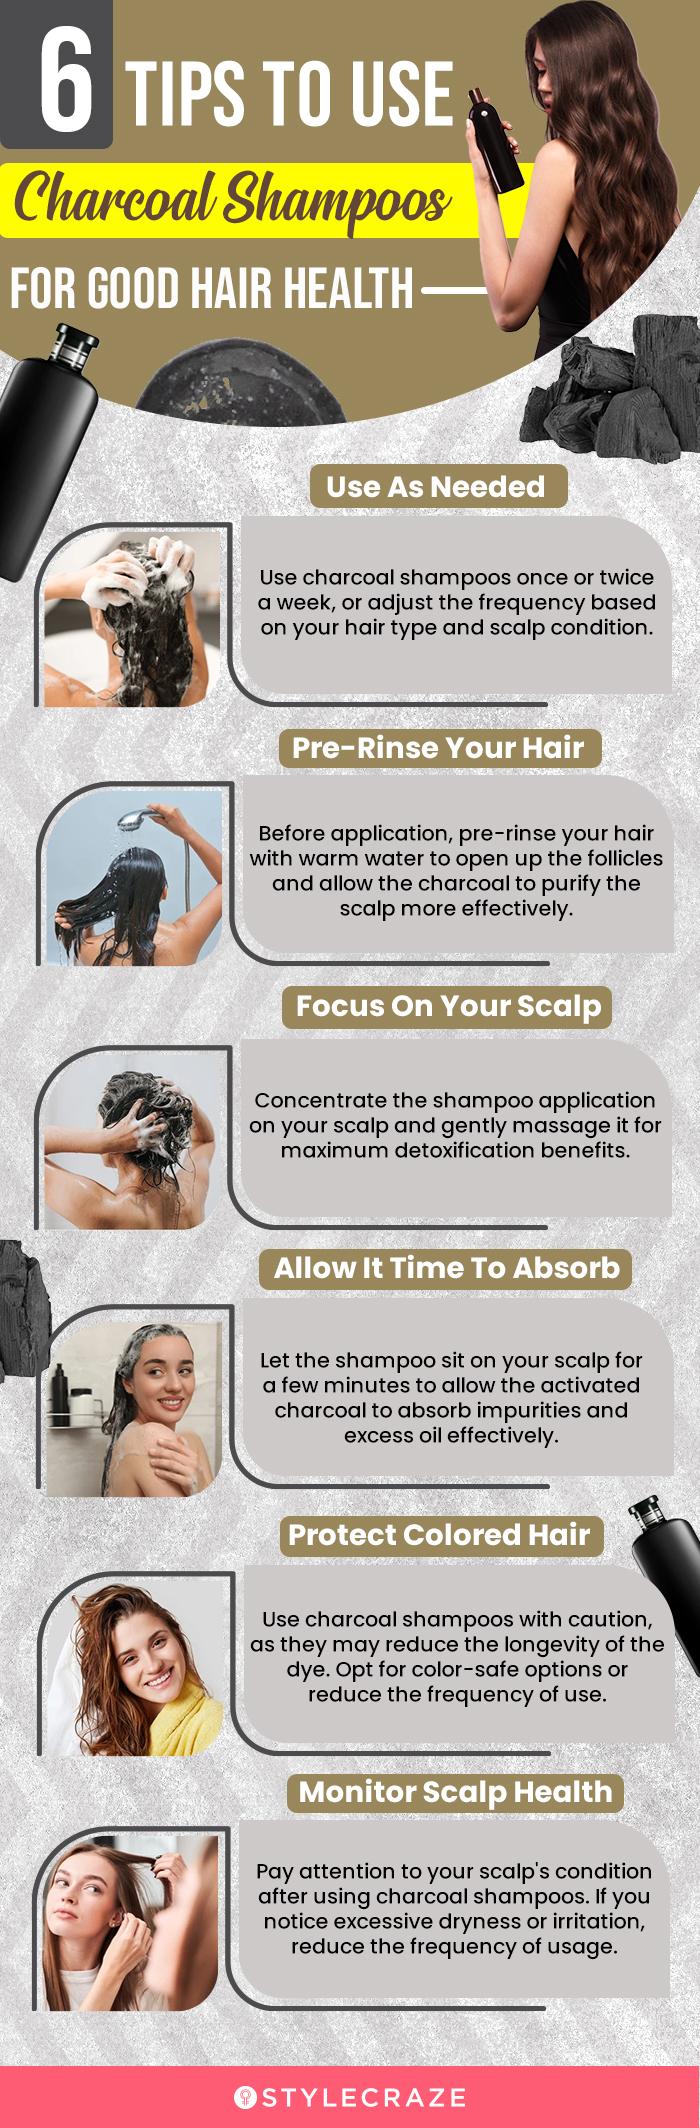 6 Tips To Use Charcoal Shampoos For Good Hair Health(infographic)